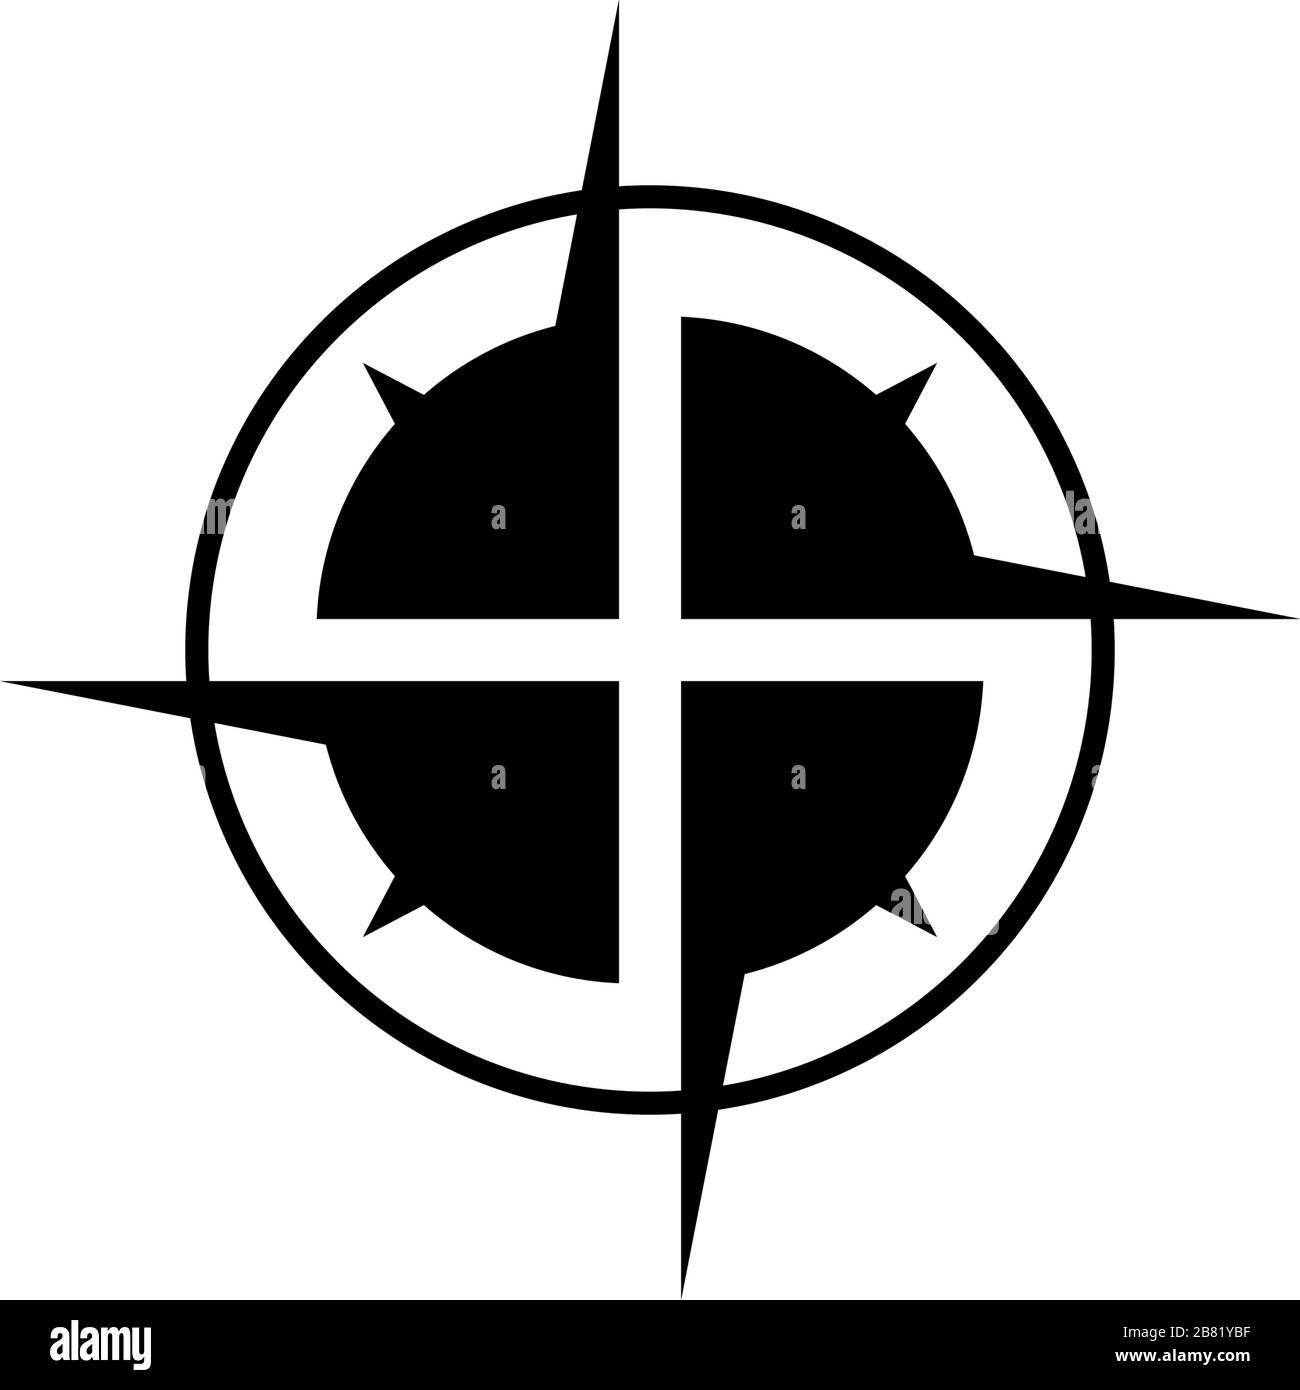 Compass graphic design template vector isolated illustration Stock Vector